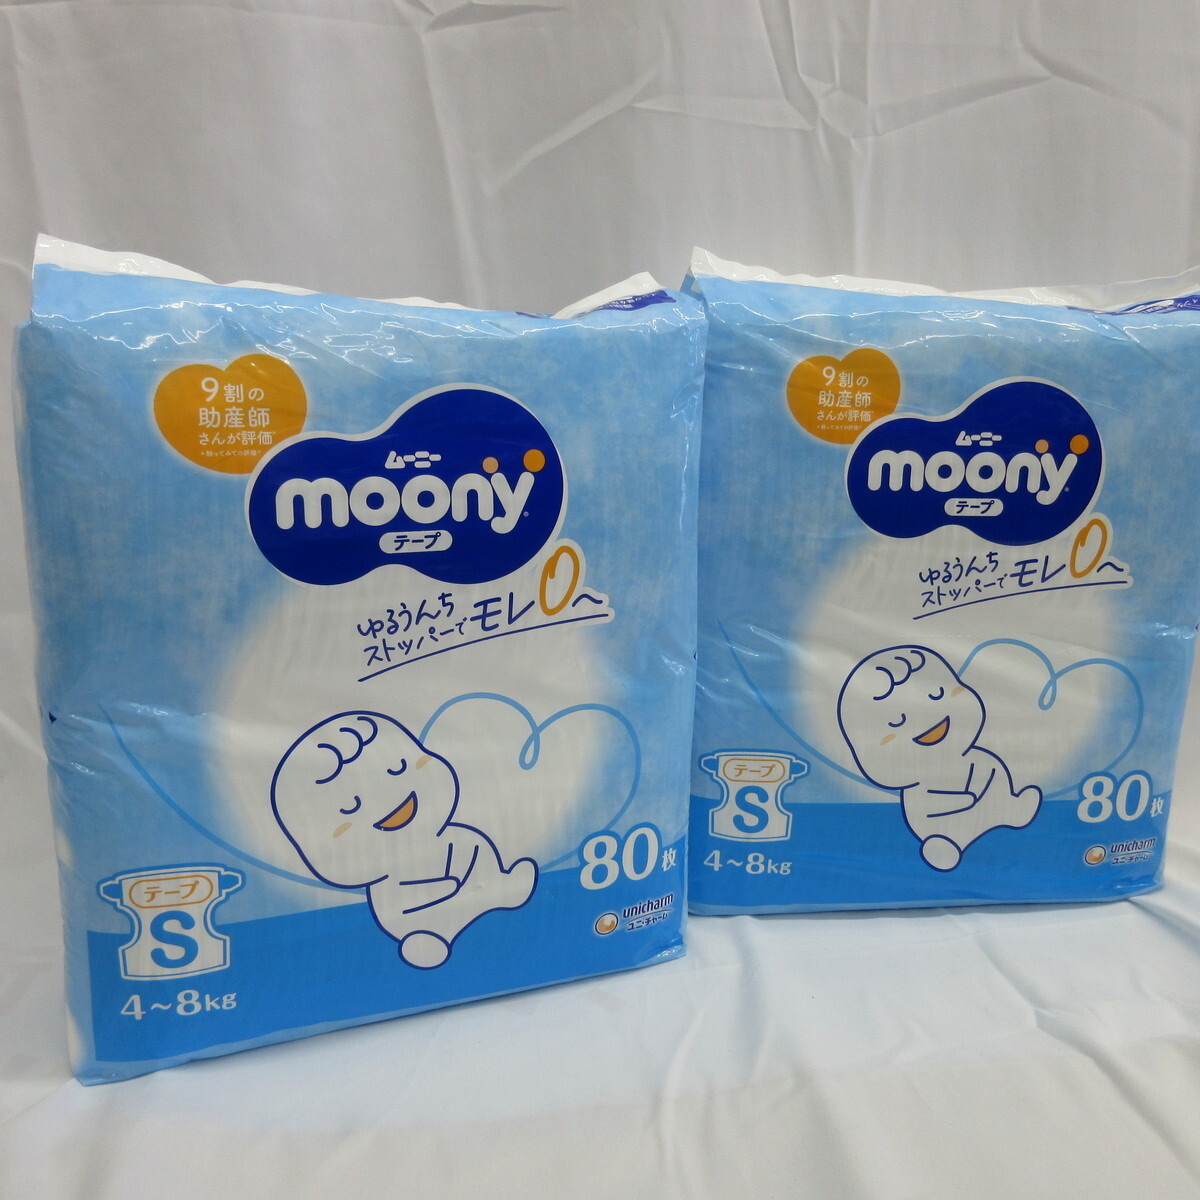 m- knee Homme tsu tape S size 80 sheets entering 2 pack moony 4~8kg baby supplies child rearing set sale set sale post-natal 2~7. month 0 -years old 